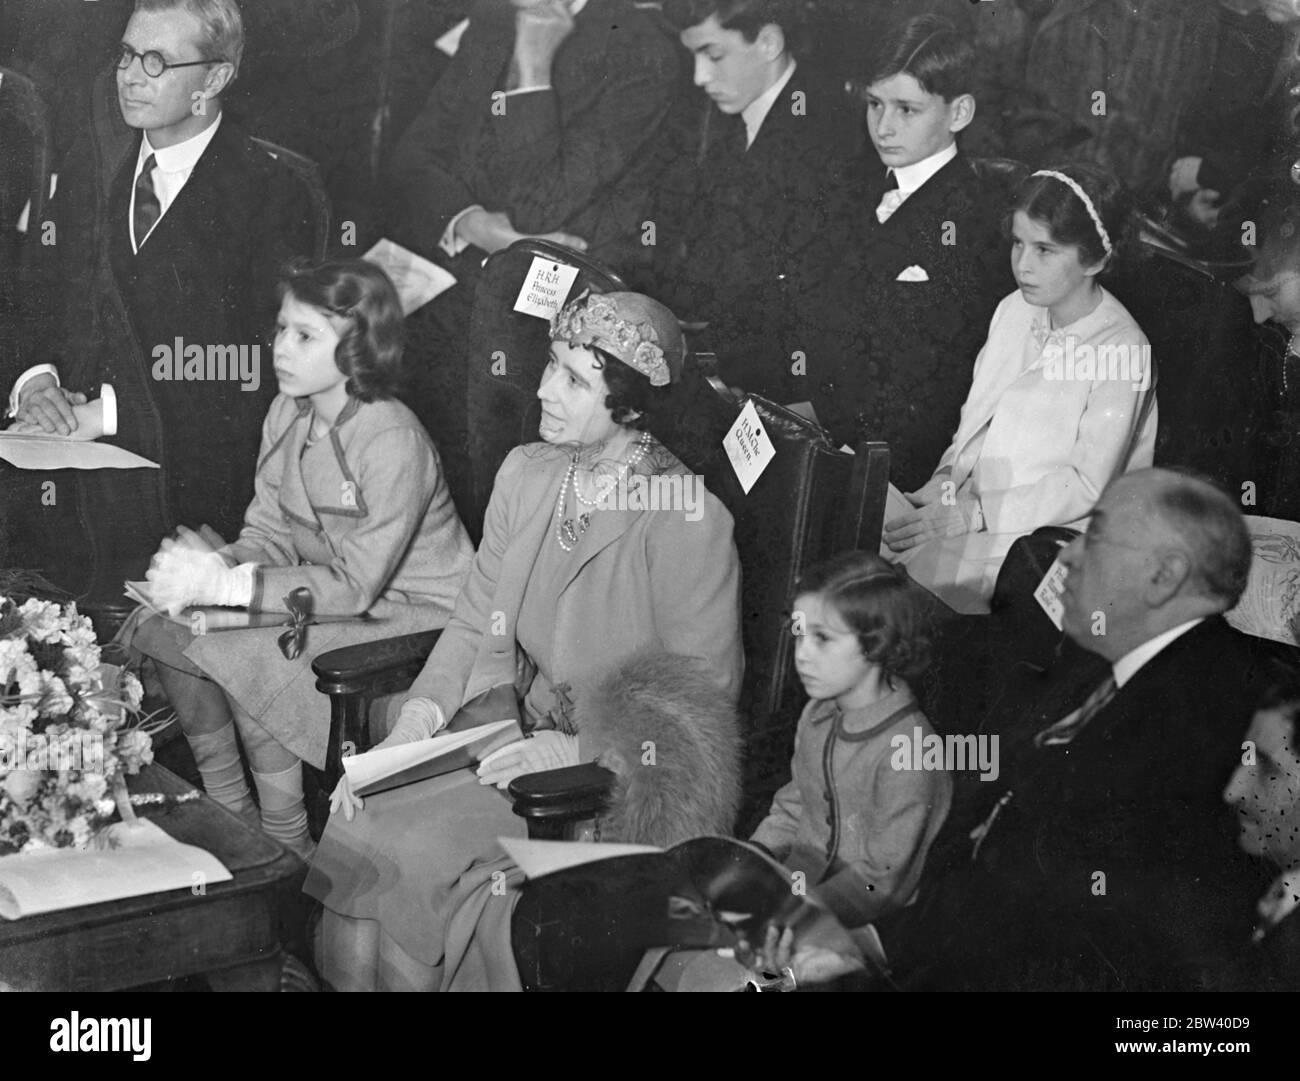 The Queen took her daughters, Princess Elizabeth and Princess Margaret Rose, to the Coronation Concert for Children at the Central Hall, Westminster. Photo shows: the Queen and Princess Elizabeth listening to the concert. 6 April 1937 Stock Photo